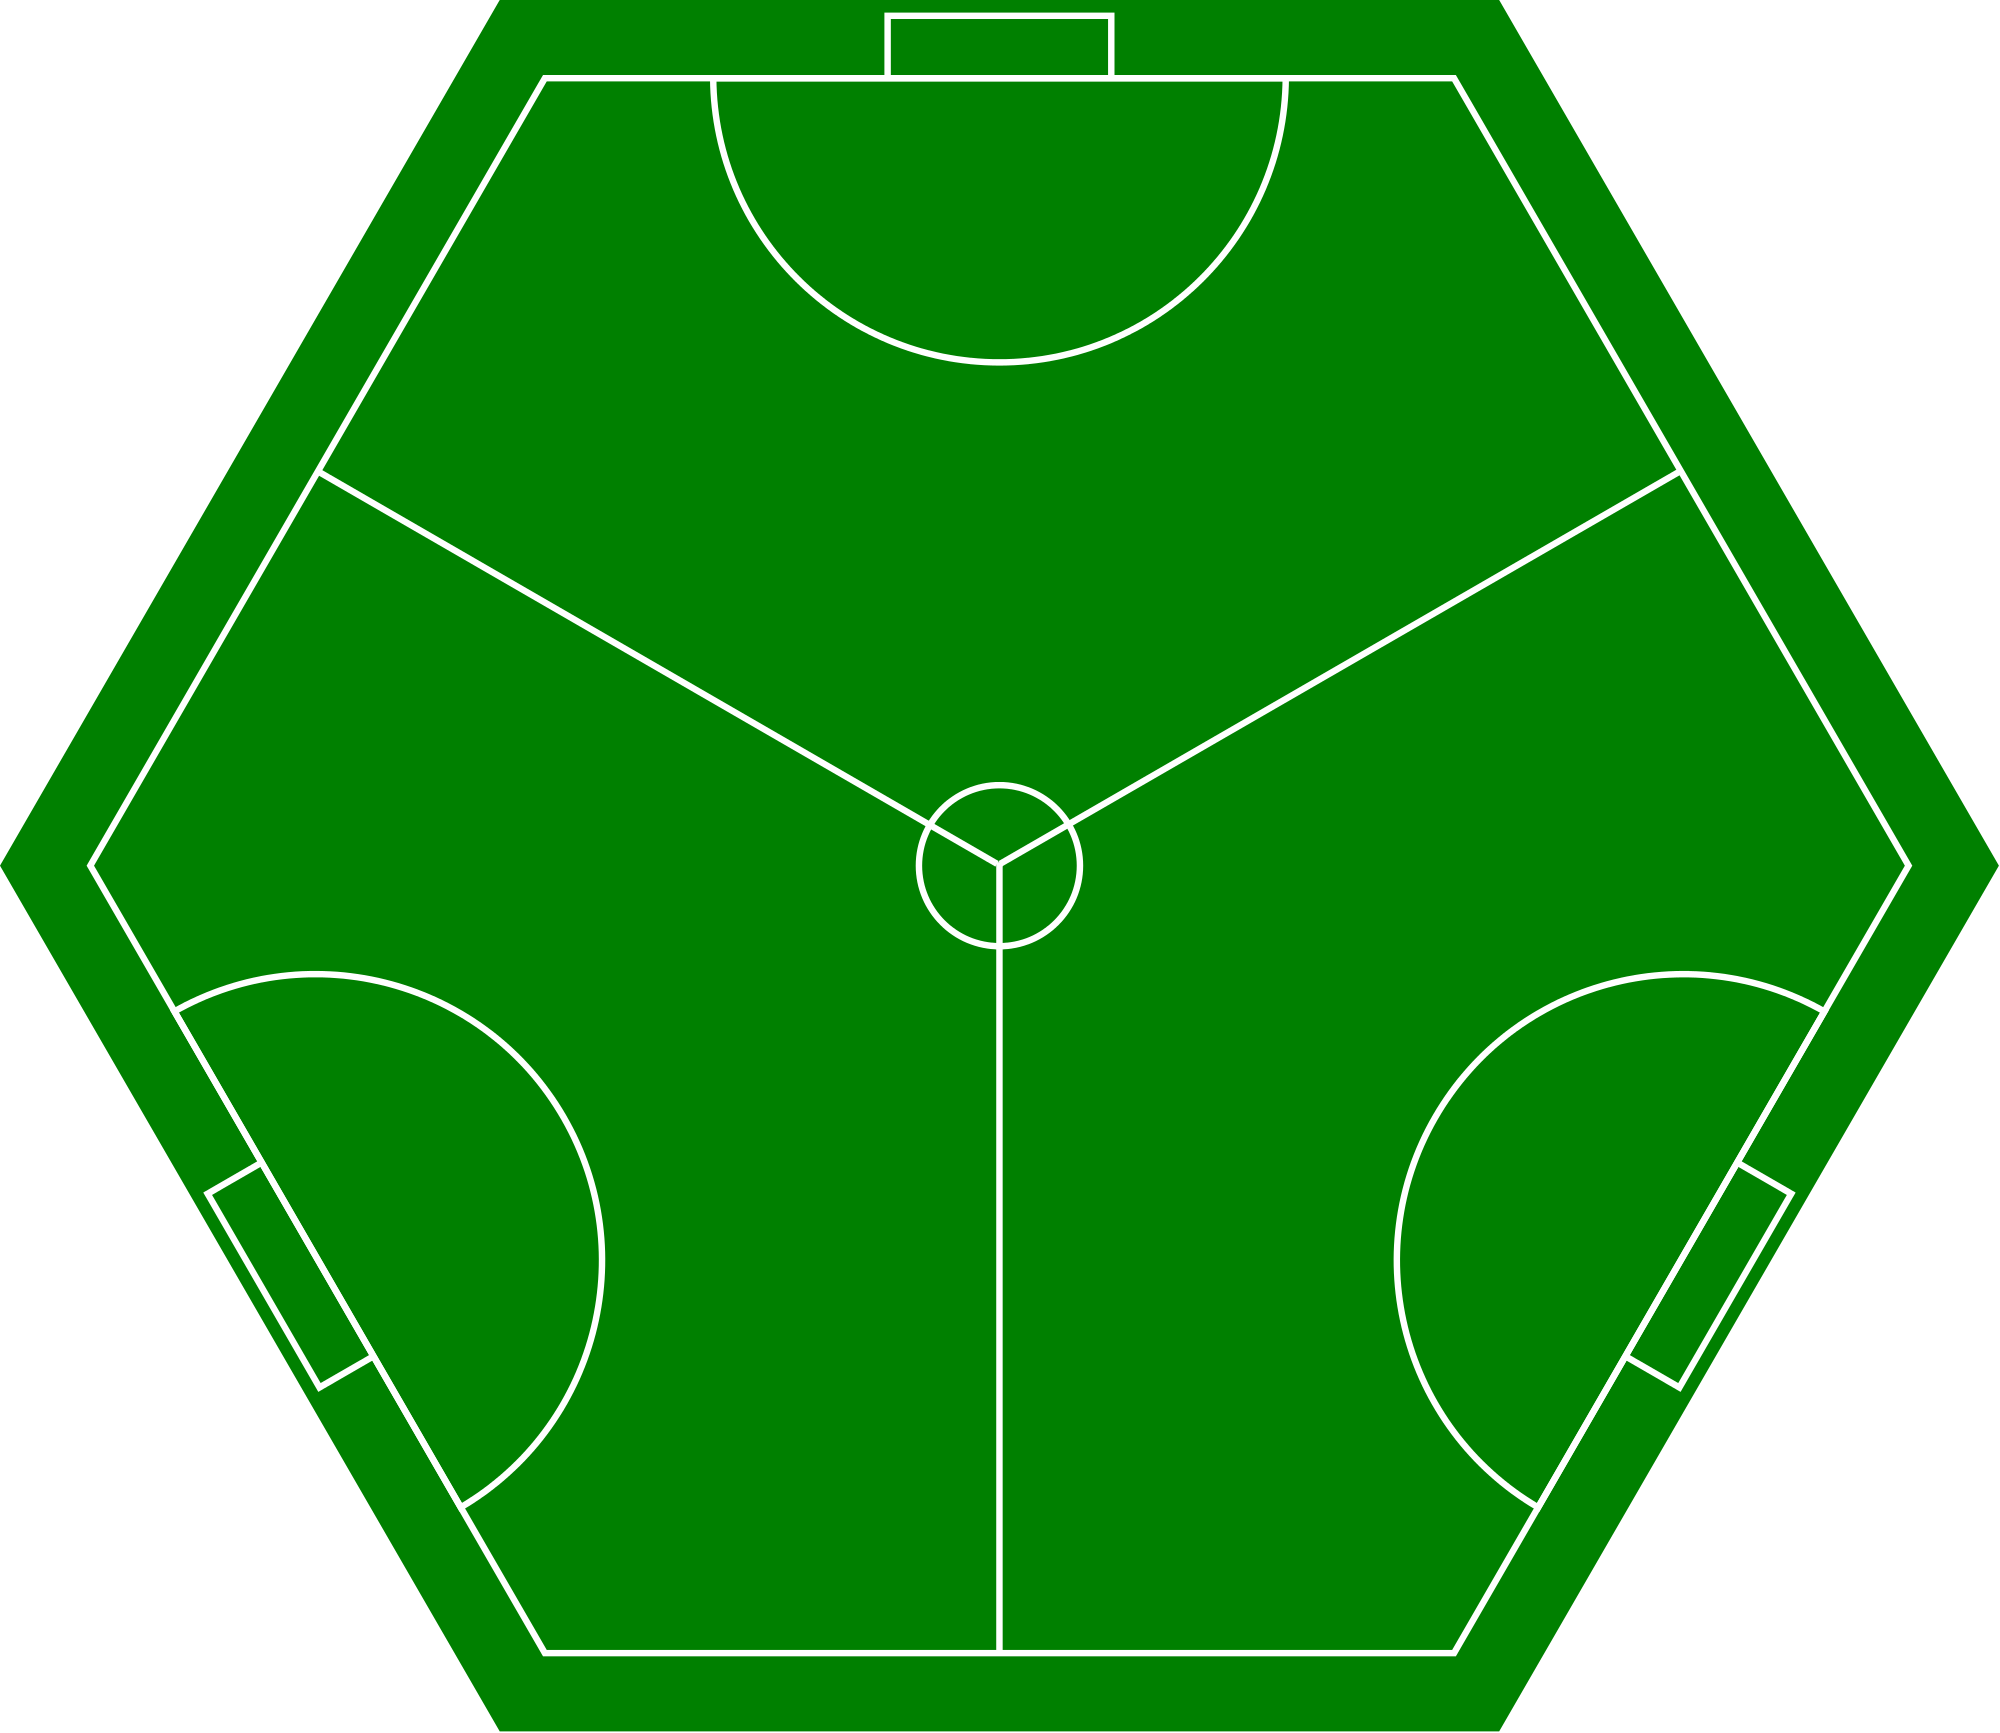 File:Three sided football pitch.svg